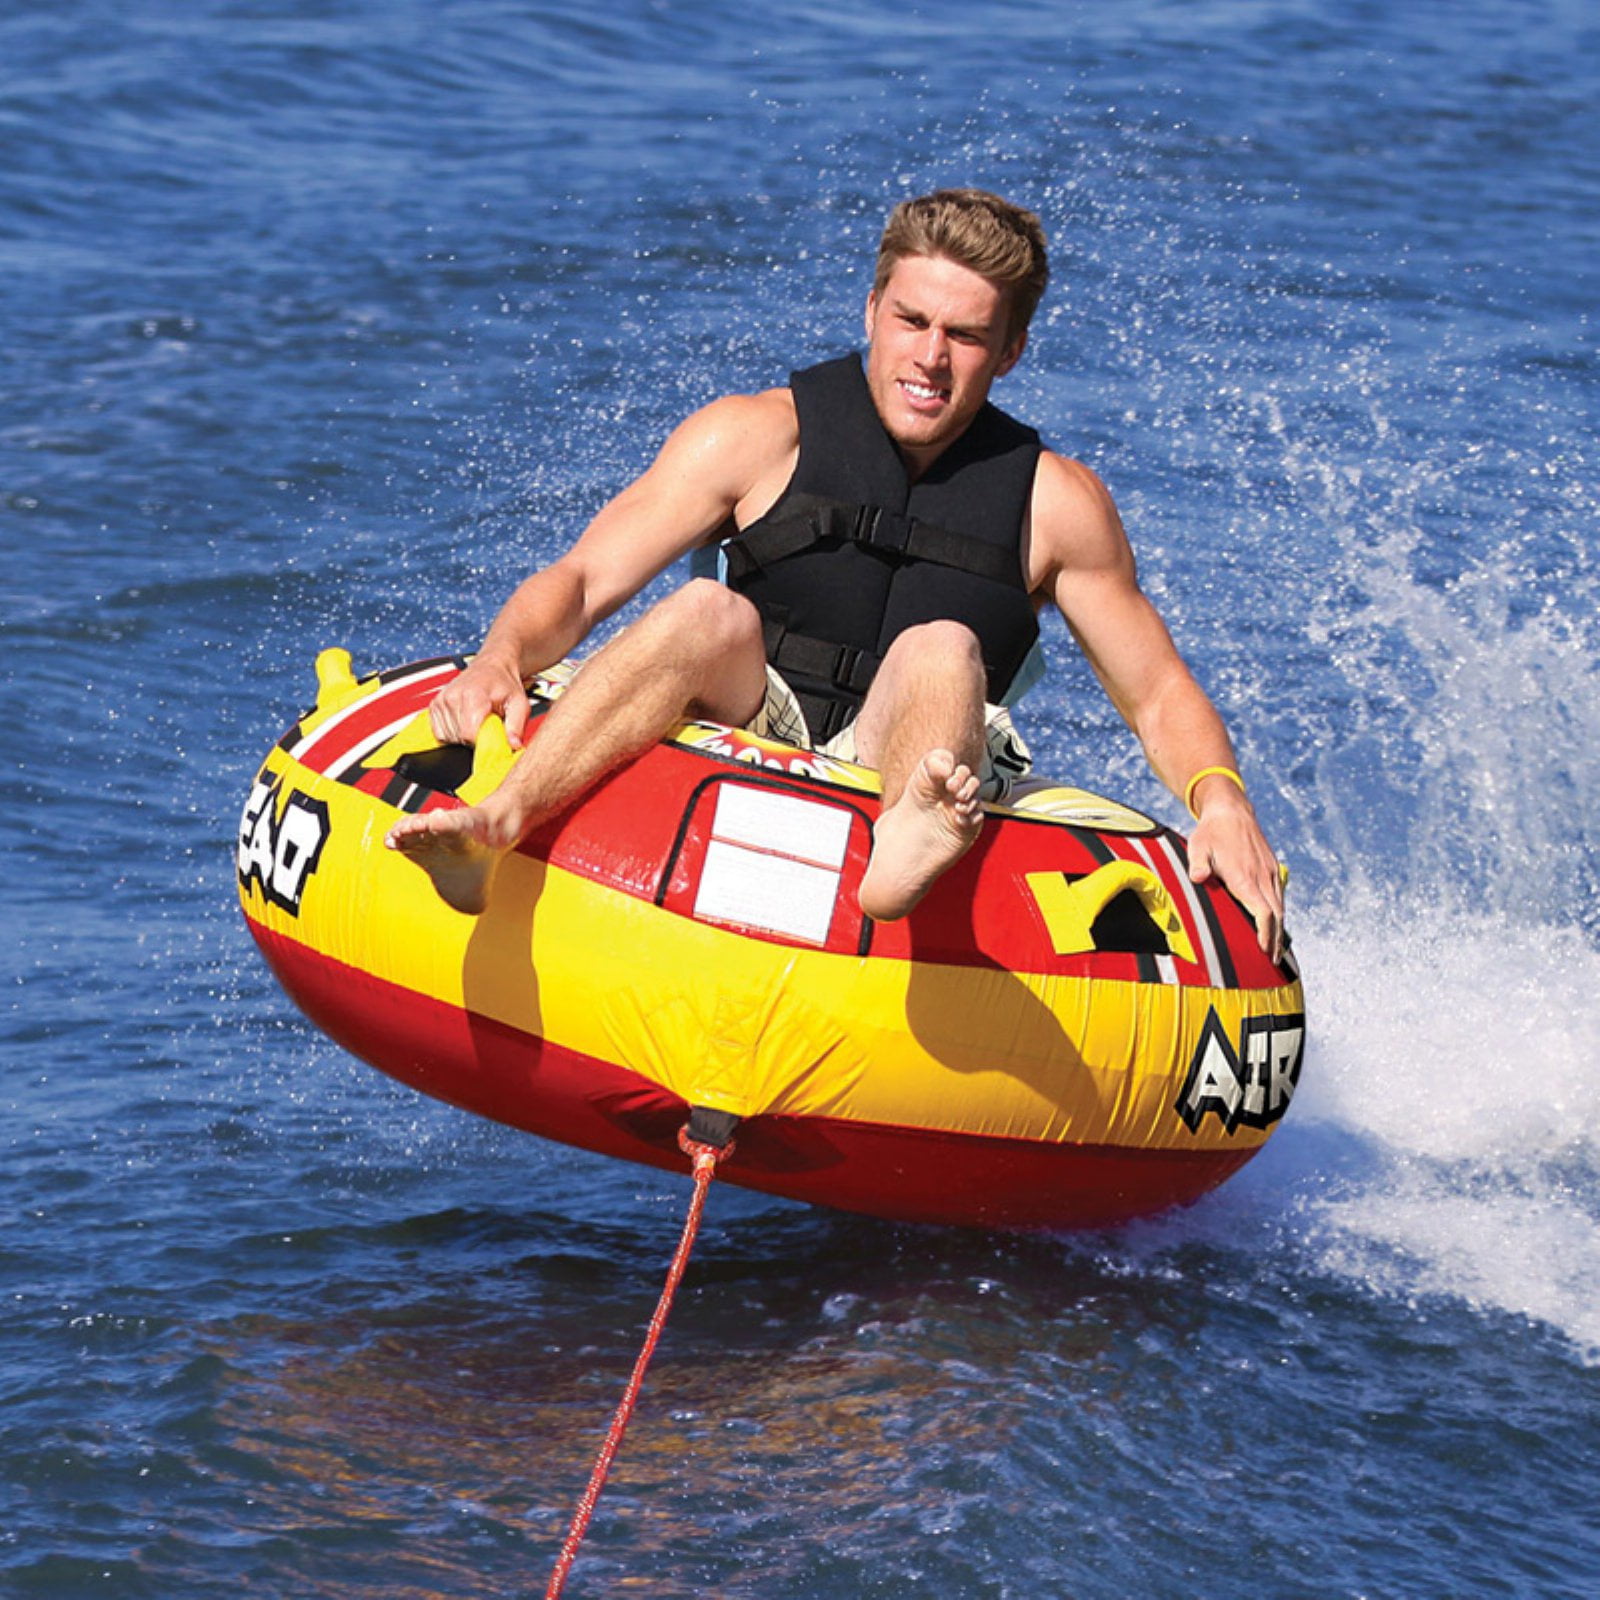 Airhead Blast Towable Tube for Boating with 1-4 Rider Options 